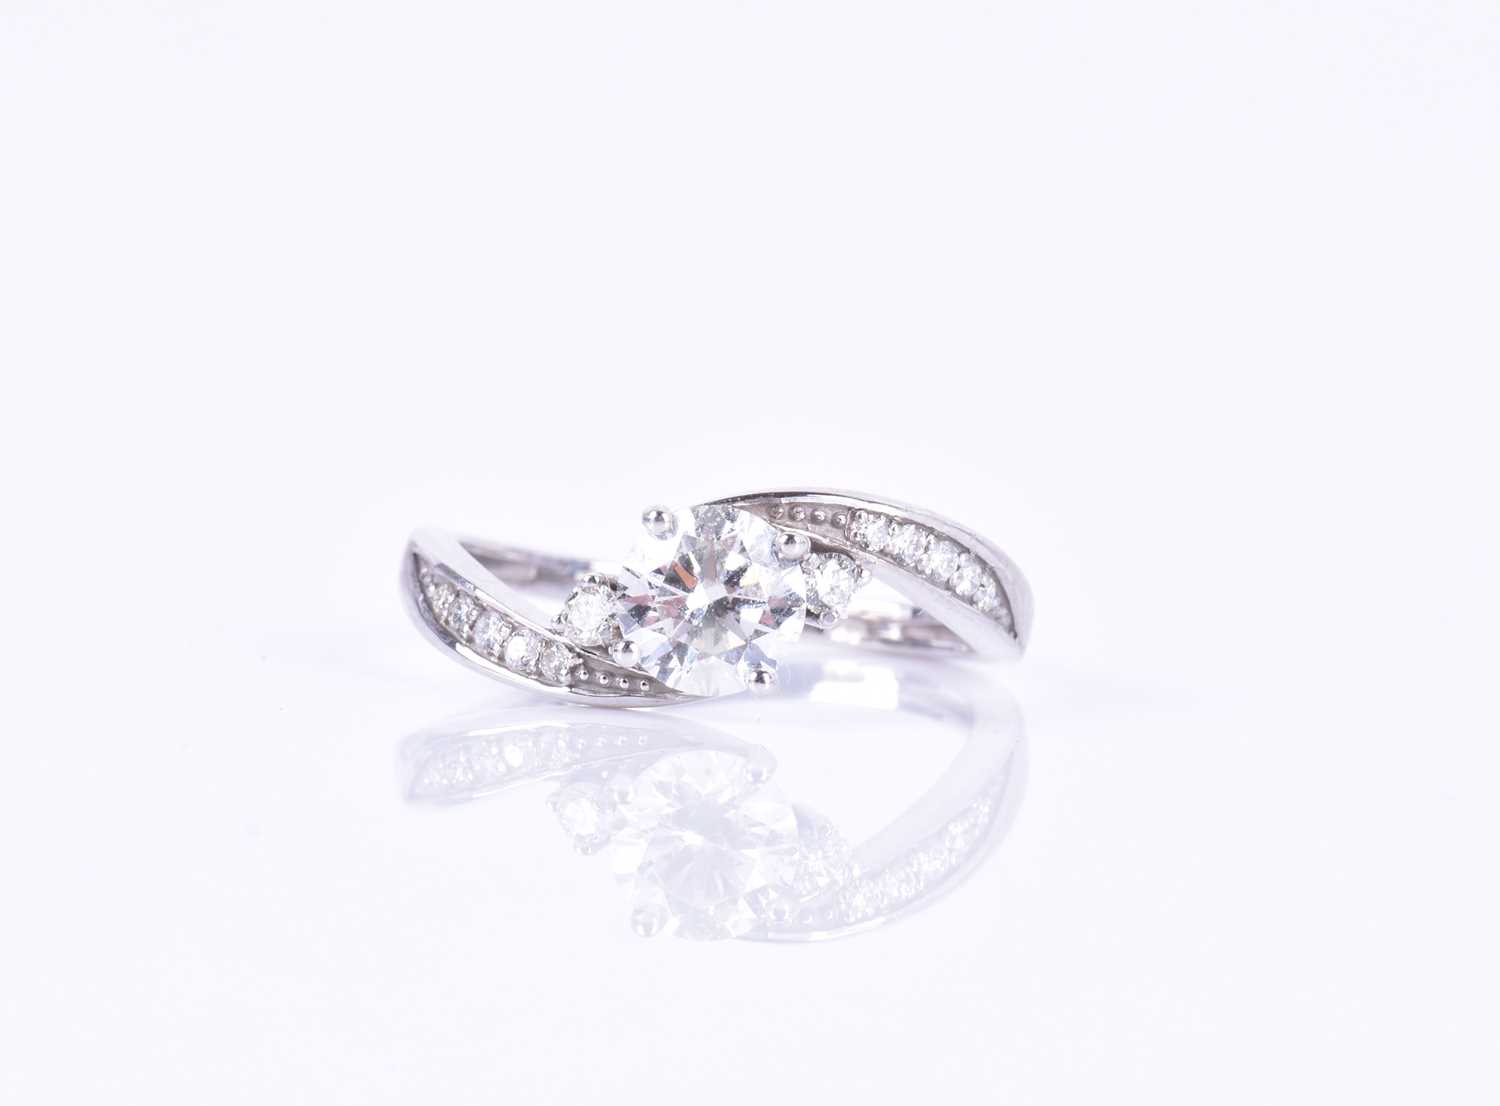 A 14ct white gold and diamond ring, centered with a round brilliant-cut diamond of approximately 0.